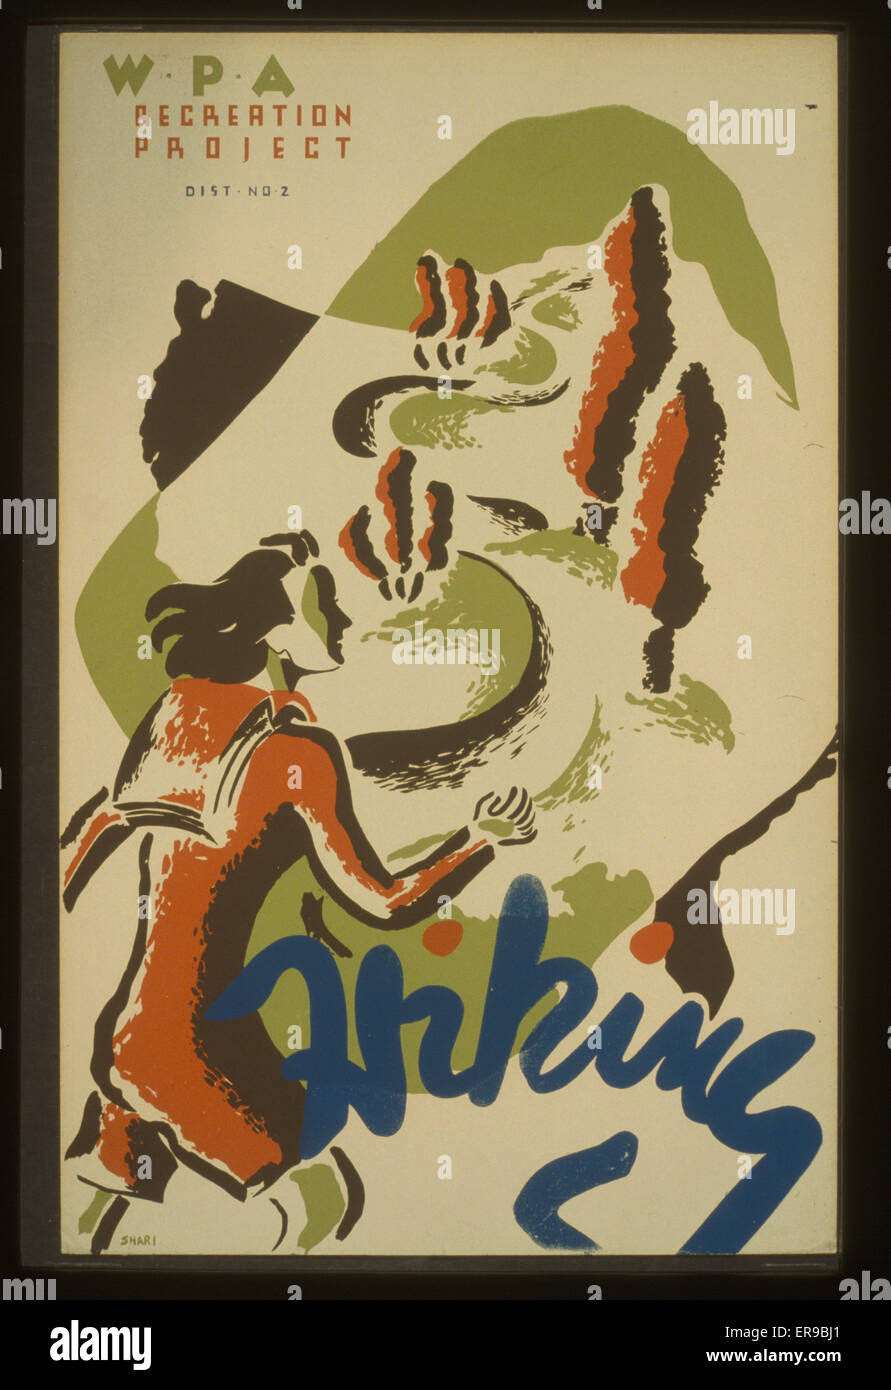 Hiking WPA recreation project - Dist. no. 2 . Poster showing a woman hiking. Date between 1936 and 1939. Stock Photo